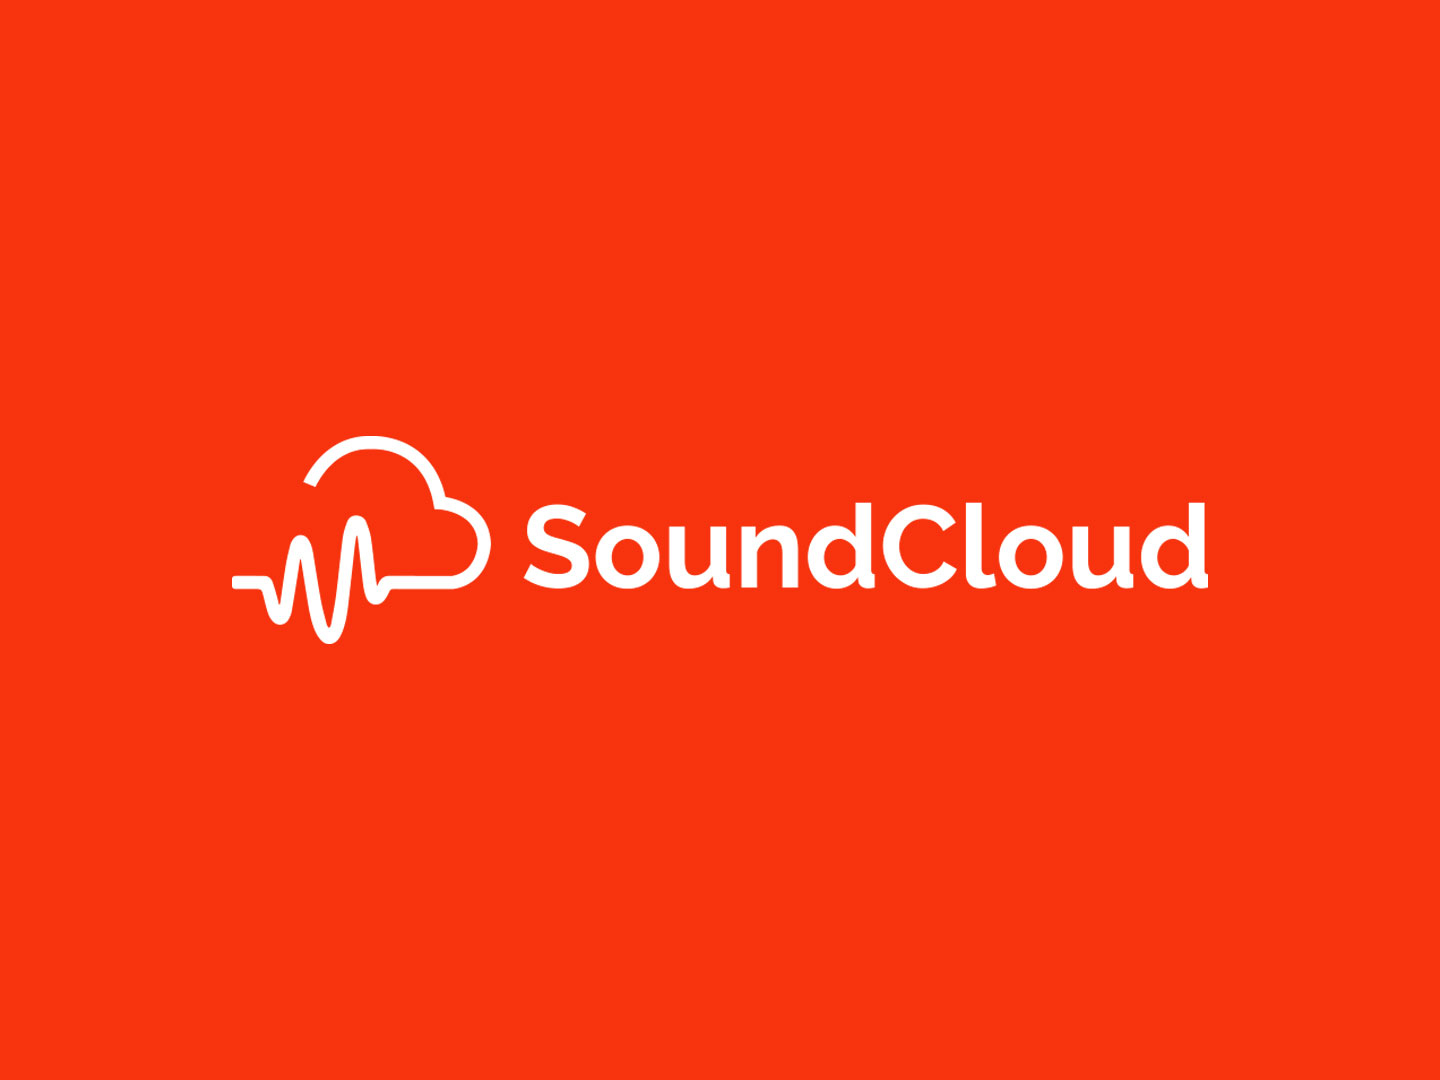 Soundcloud Logo Redesign By Angela Ramos On Dribbble